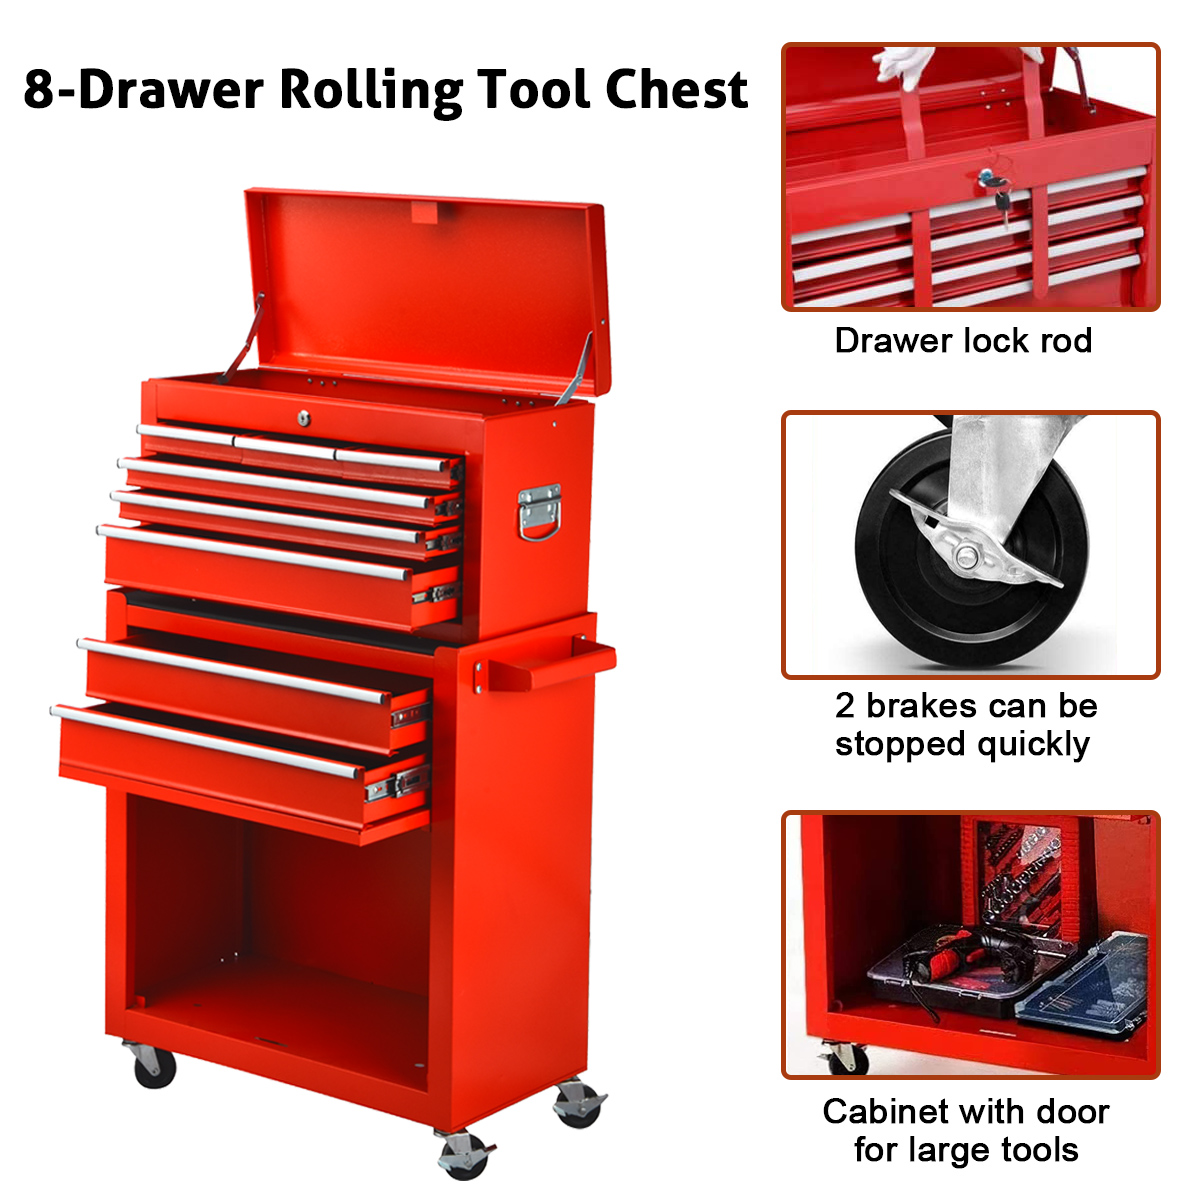 BCBYou 8-Drawer Tool Chest with Wheels, Tool Storage Cabinet and Tool Box, Lockable Rolling Tool Chest with drawers, Toolbox Organizer for Garage Warehouse Workshop (Red) - image 4 of 8